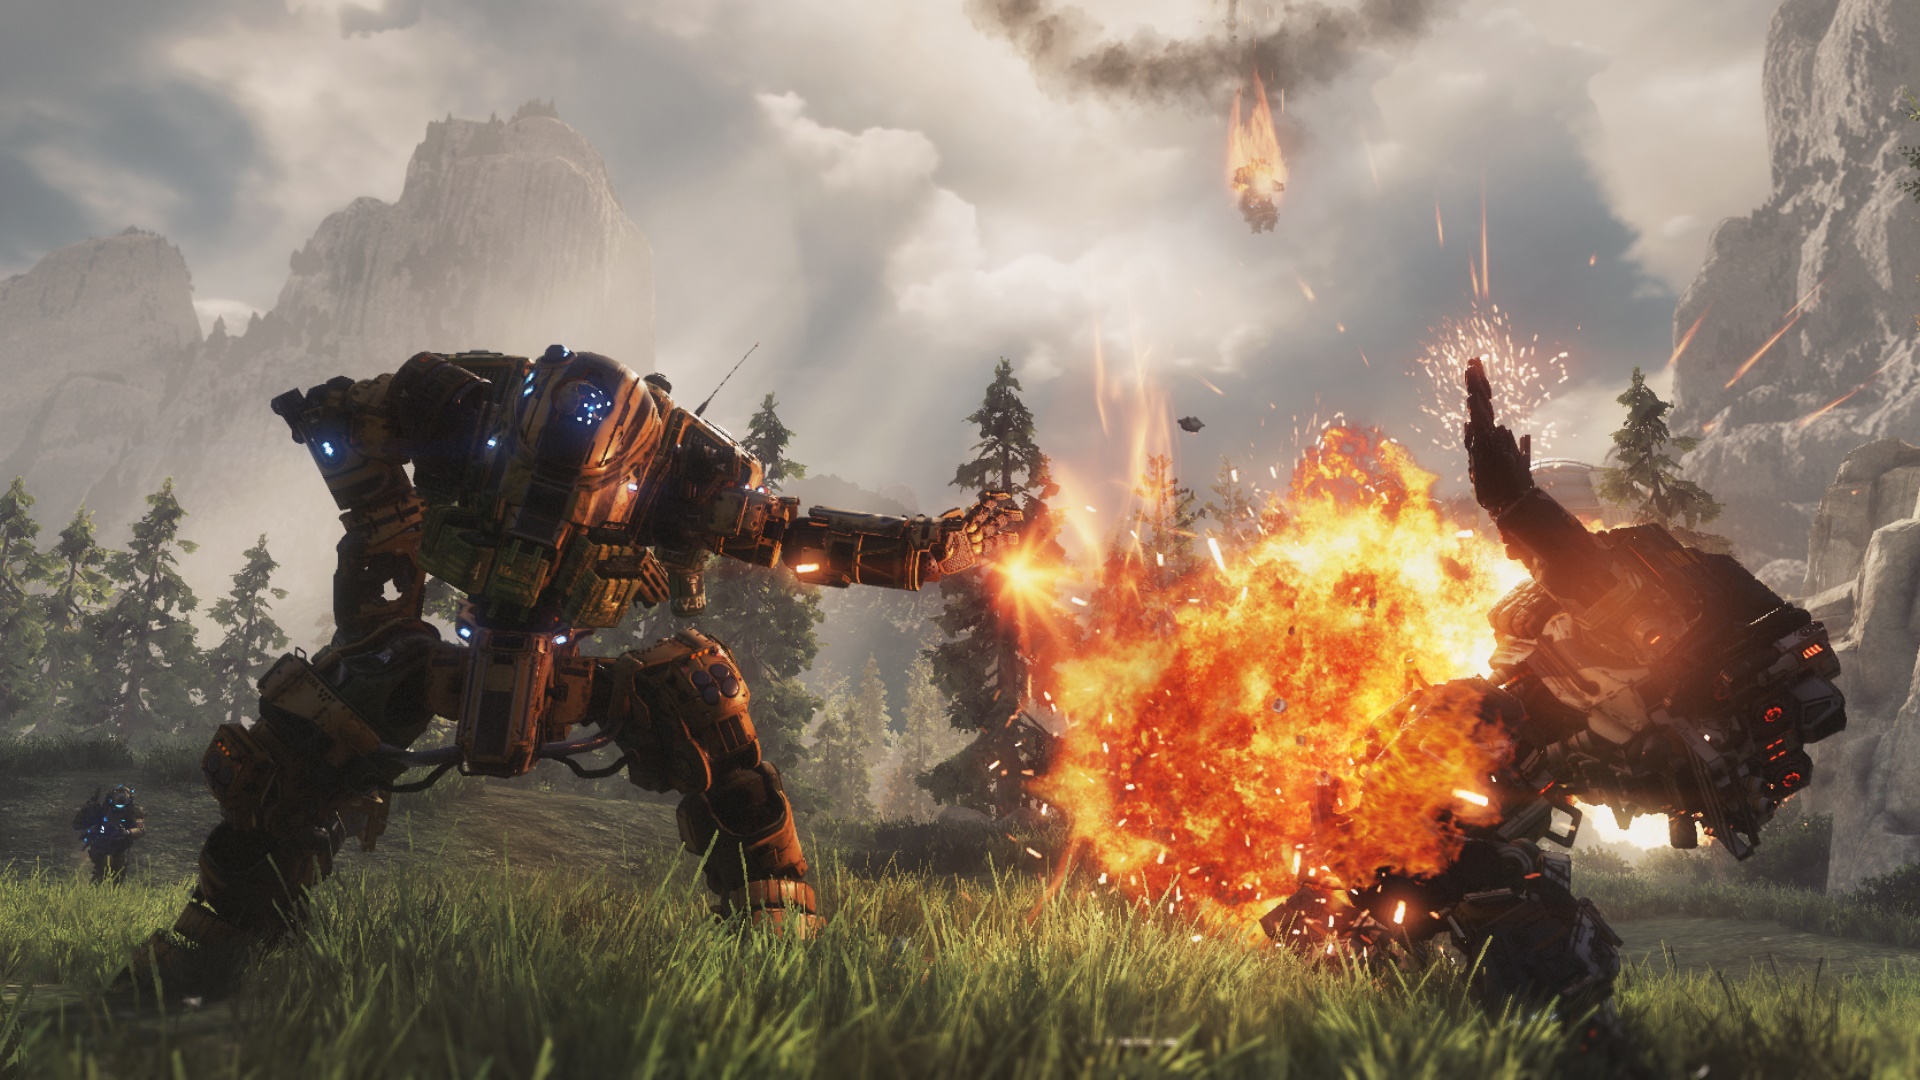 A mech shoots a plume of flame in Titanfall 2, one of the best robot games